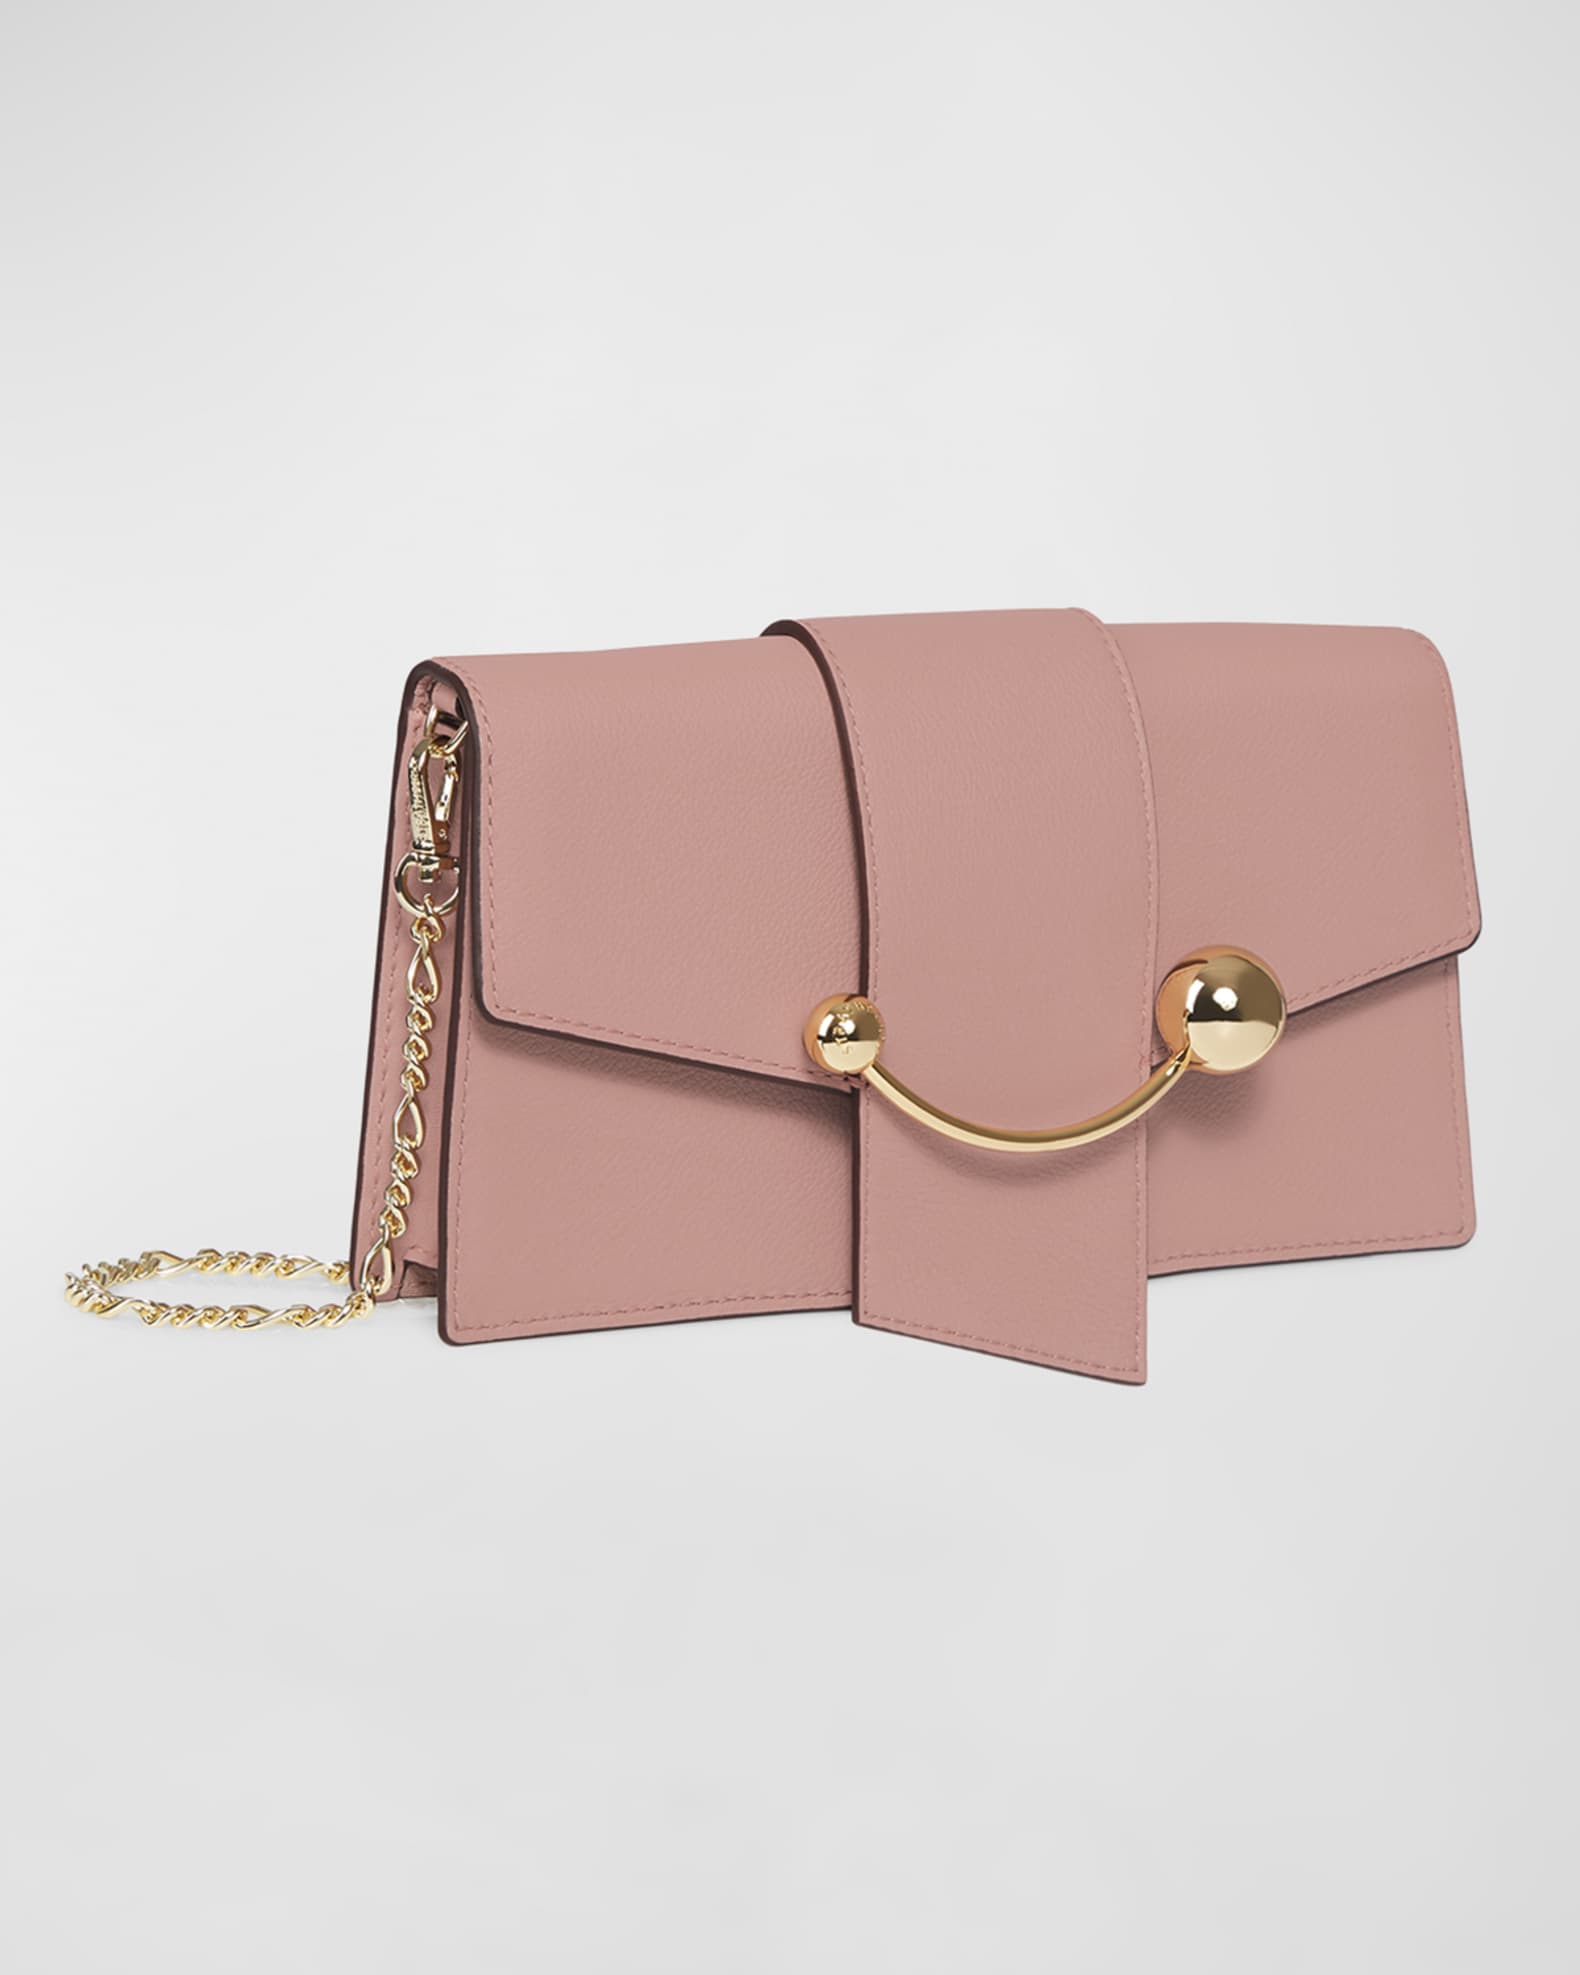 Strathberry Crescent on A Chain Leather Shoulder Bag, Blush Rose, Women's, Handbags & Purses Crossbody Bags & Camera Bags